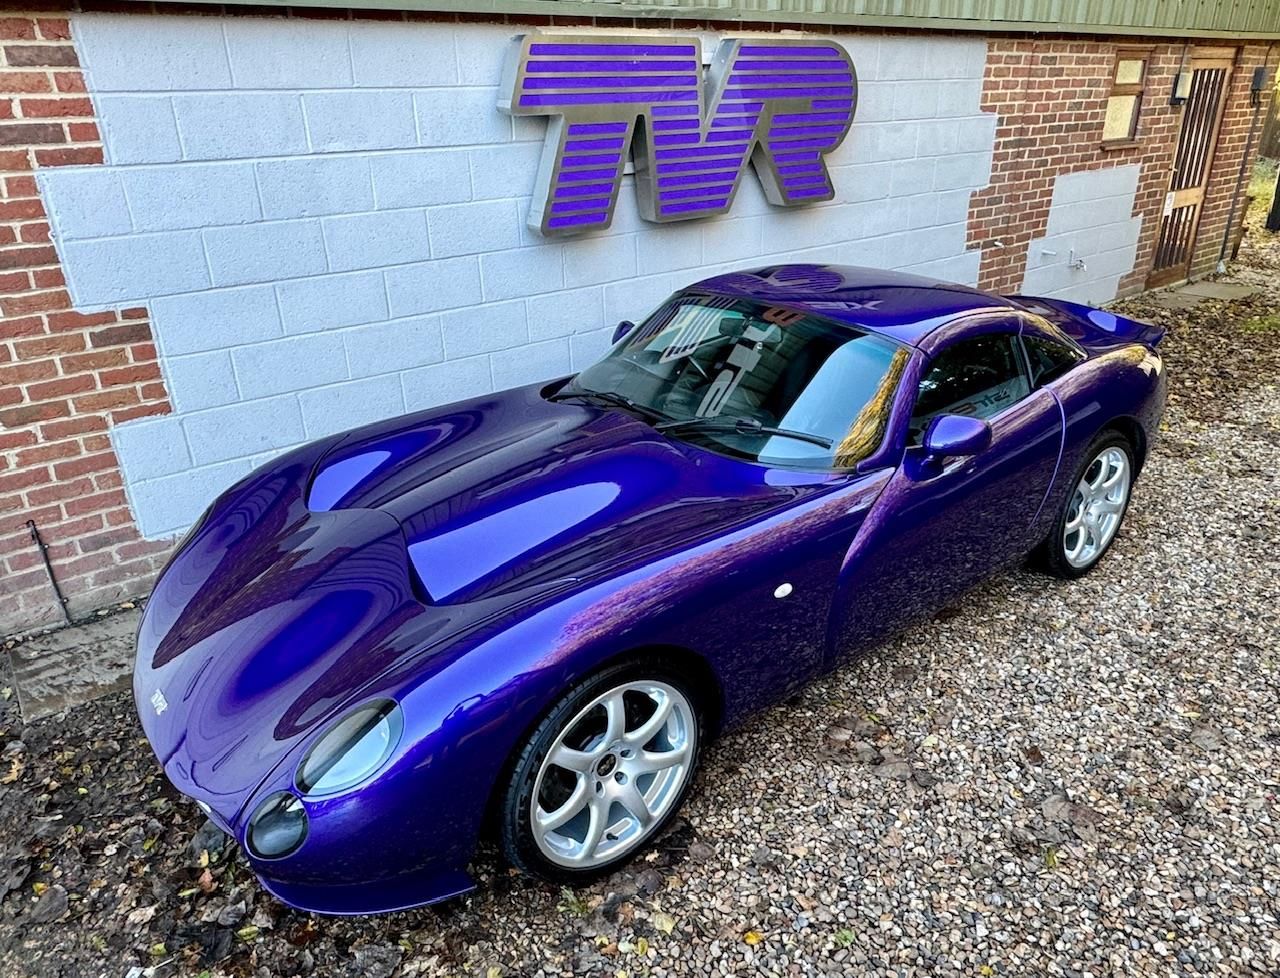 SOLD-2005 TVR TUSCAN Mk 2 4.0S - 